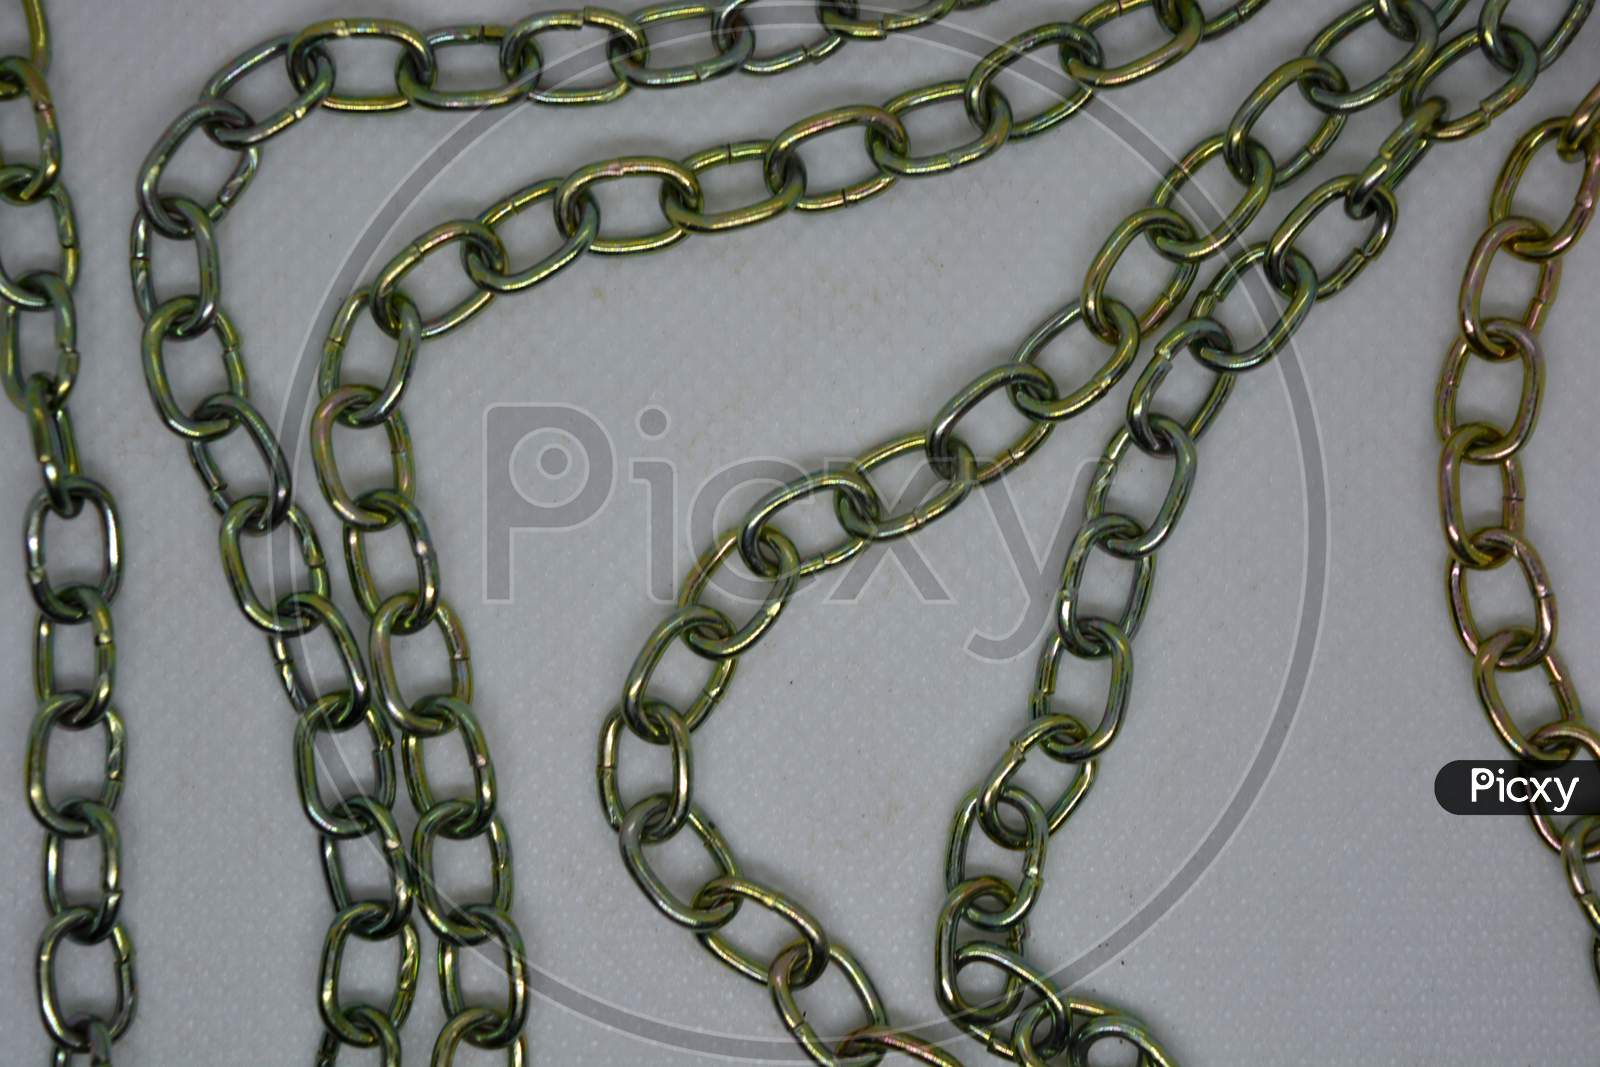 Unusual bright metal chains with overflows located chaotic way on a white background.